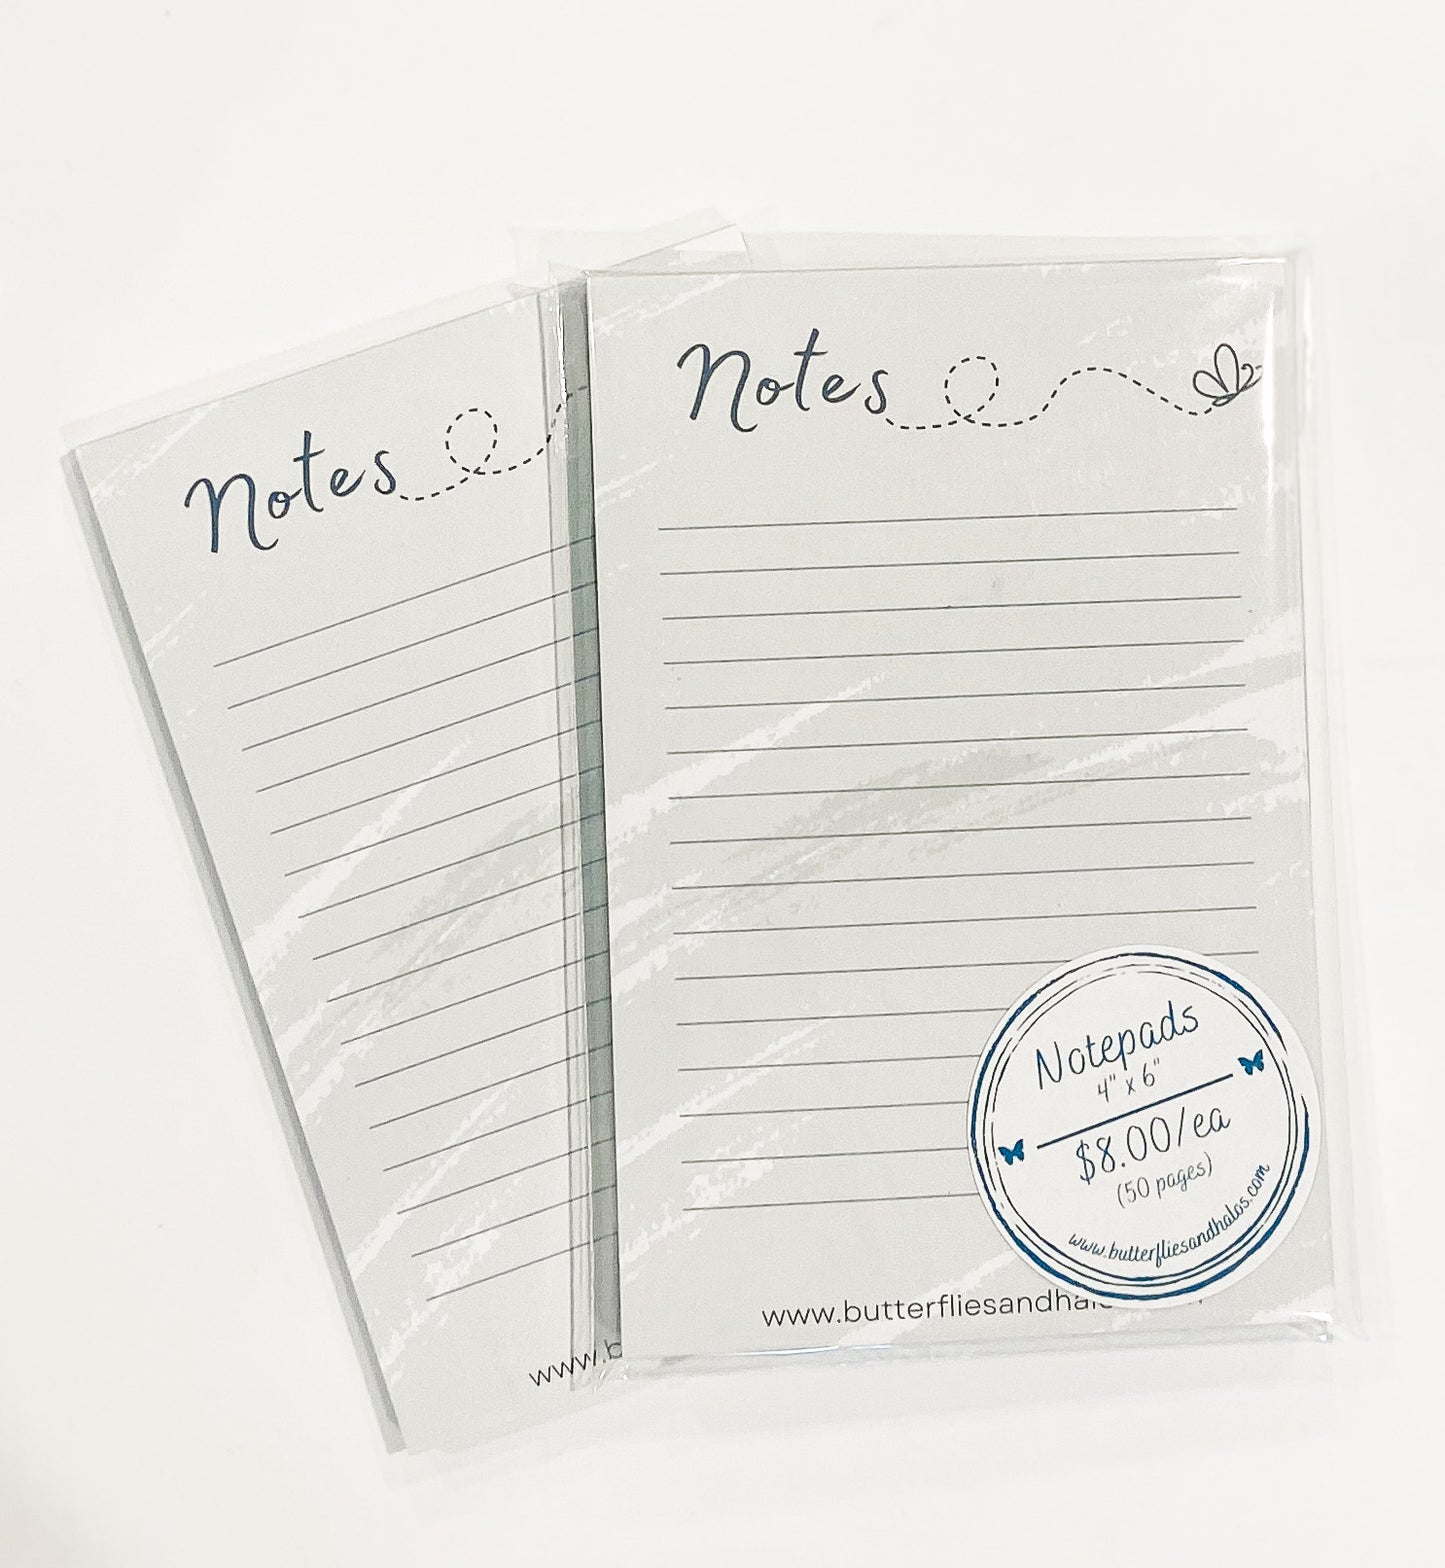 Notepads - "Notes"